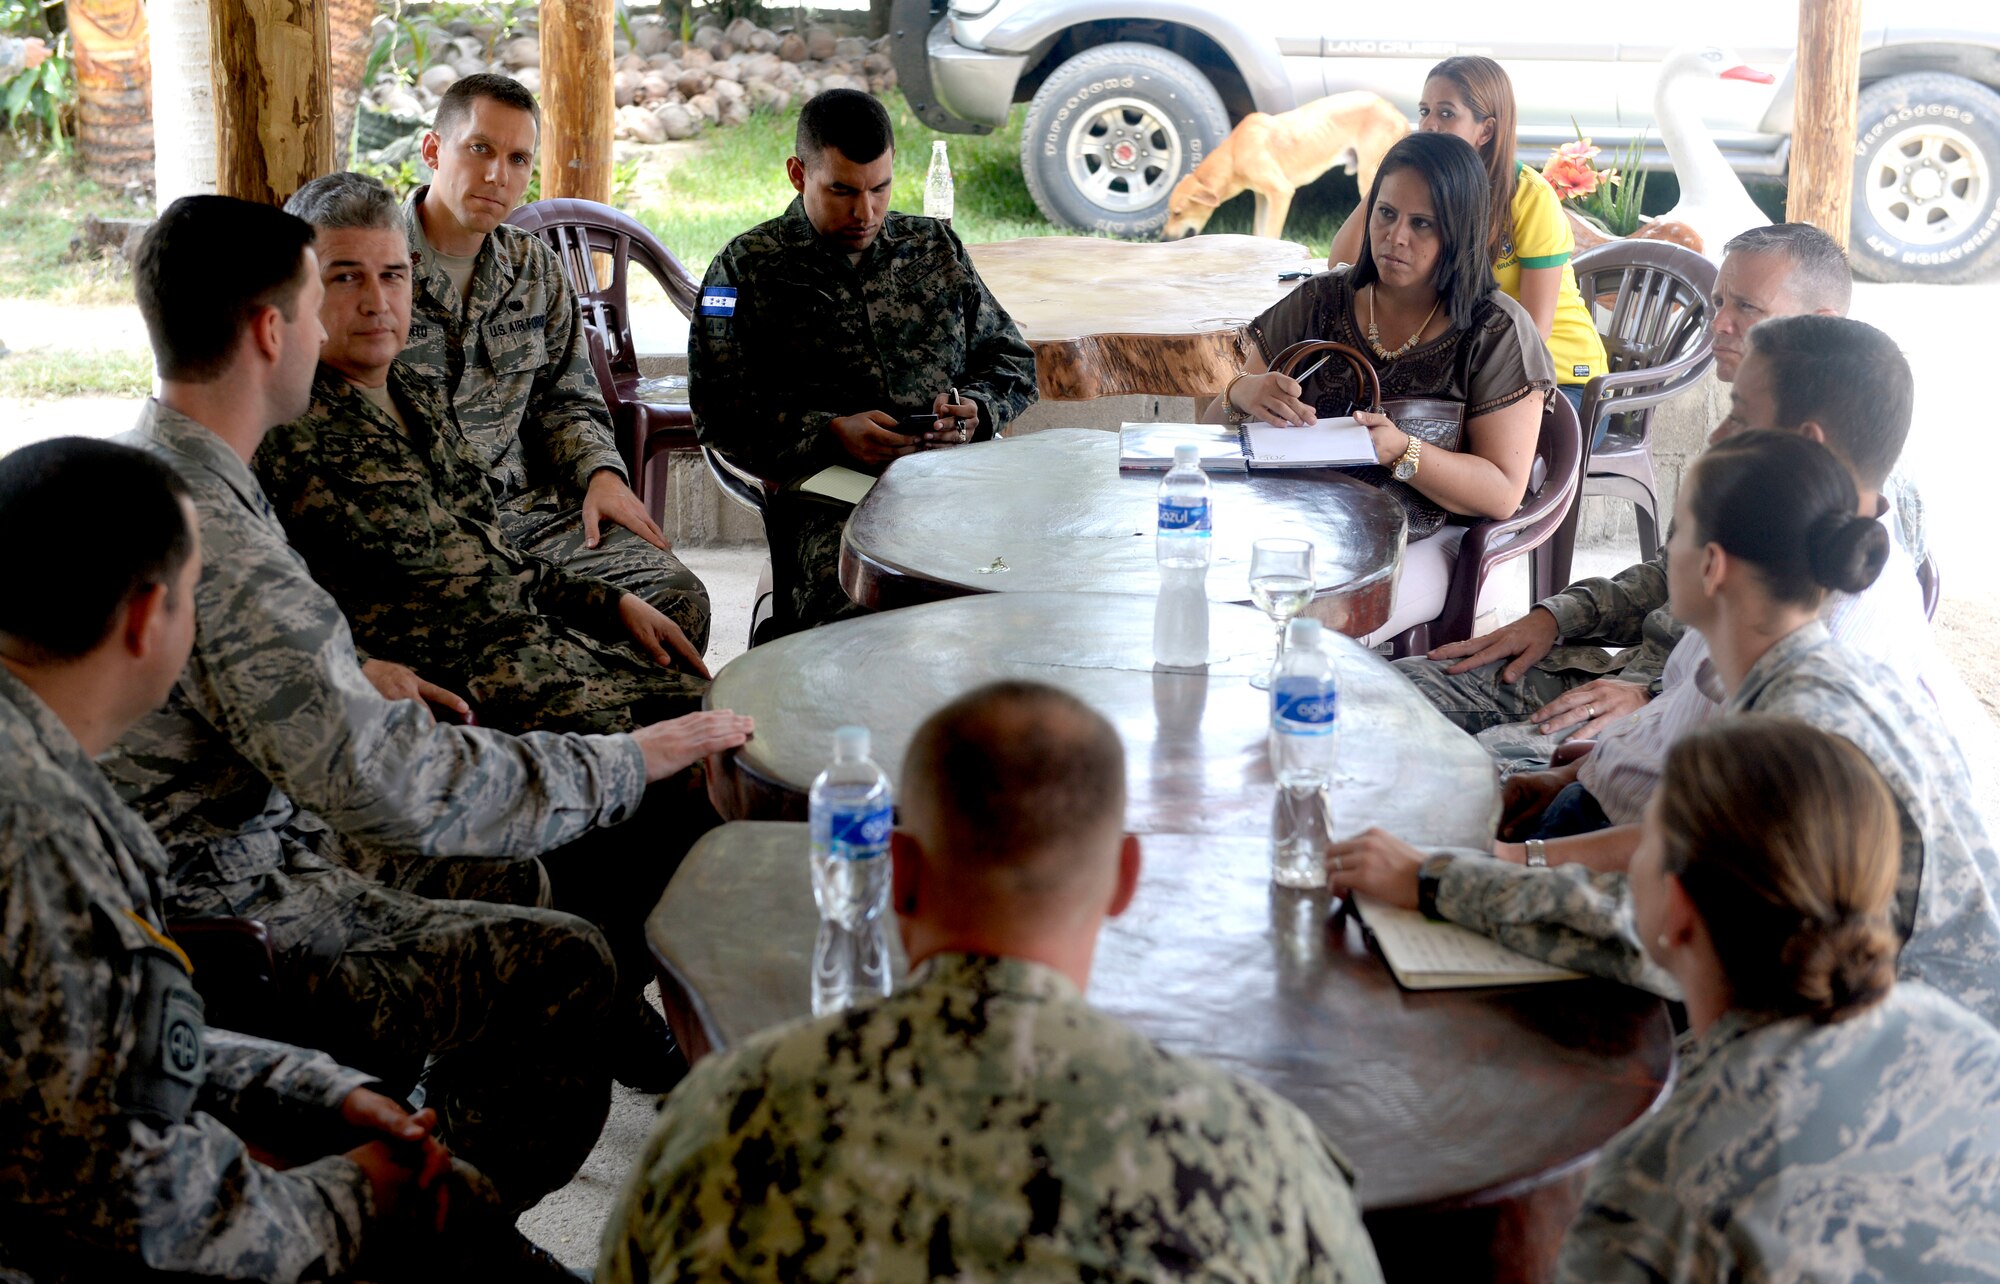 Exercise New Horizons Honduras 2015 leadership and Department of Colón leadership met in Trujillo, Honduras, May 30, 2015. Elliott, a Grove City, Penn., native, held the meeting in order to give local leadership the opportunity to meet and answer questions of various New Horizons personnel prior to the official start of the exercise. New Horizons was launched in the 1980s and is an annual joint humanitarian assistance exercise that U.S. Southern Command conducts with a partner nation in Central America, South America or the Caribbean. The exercise improves joint training readiness of U.S. and partner nation civil engineers, medical professionals and support personnel through humanitarian assistance activities. (U.S. Air Force photo by Capt. David J. Murphy/Released)